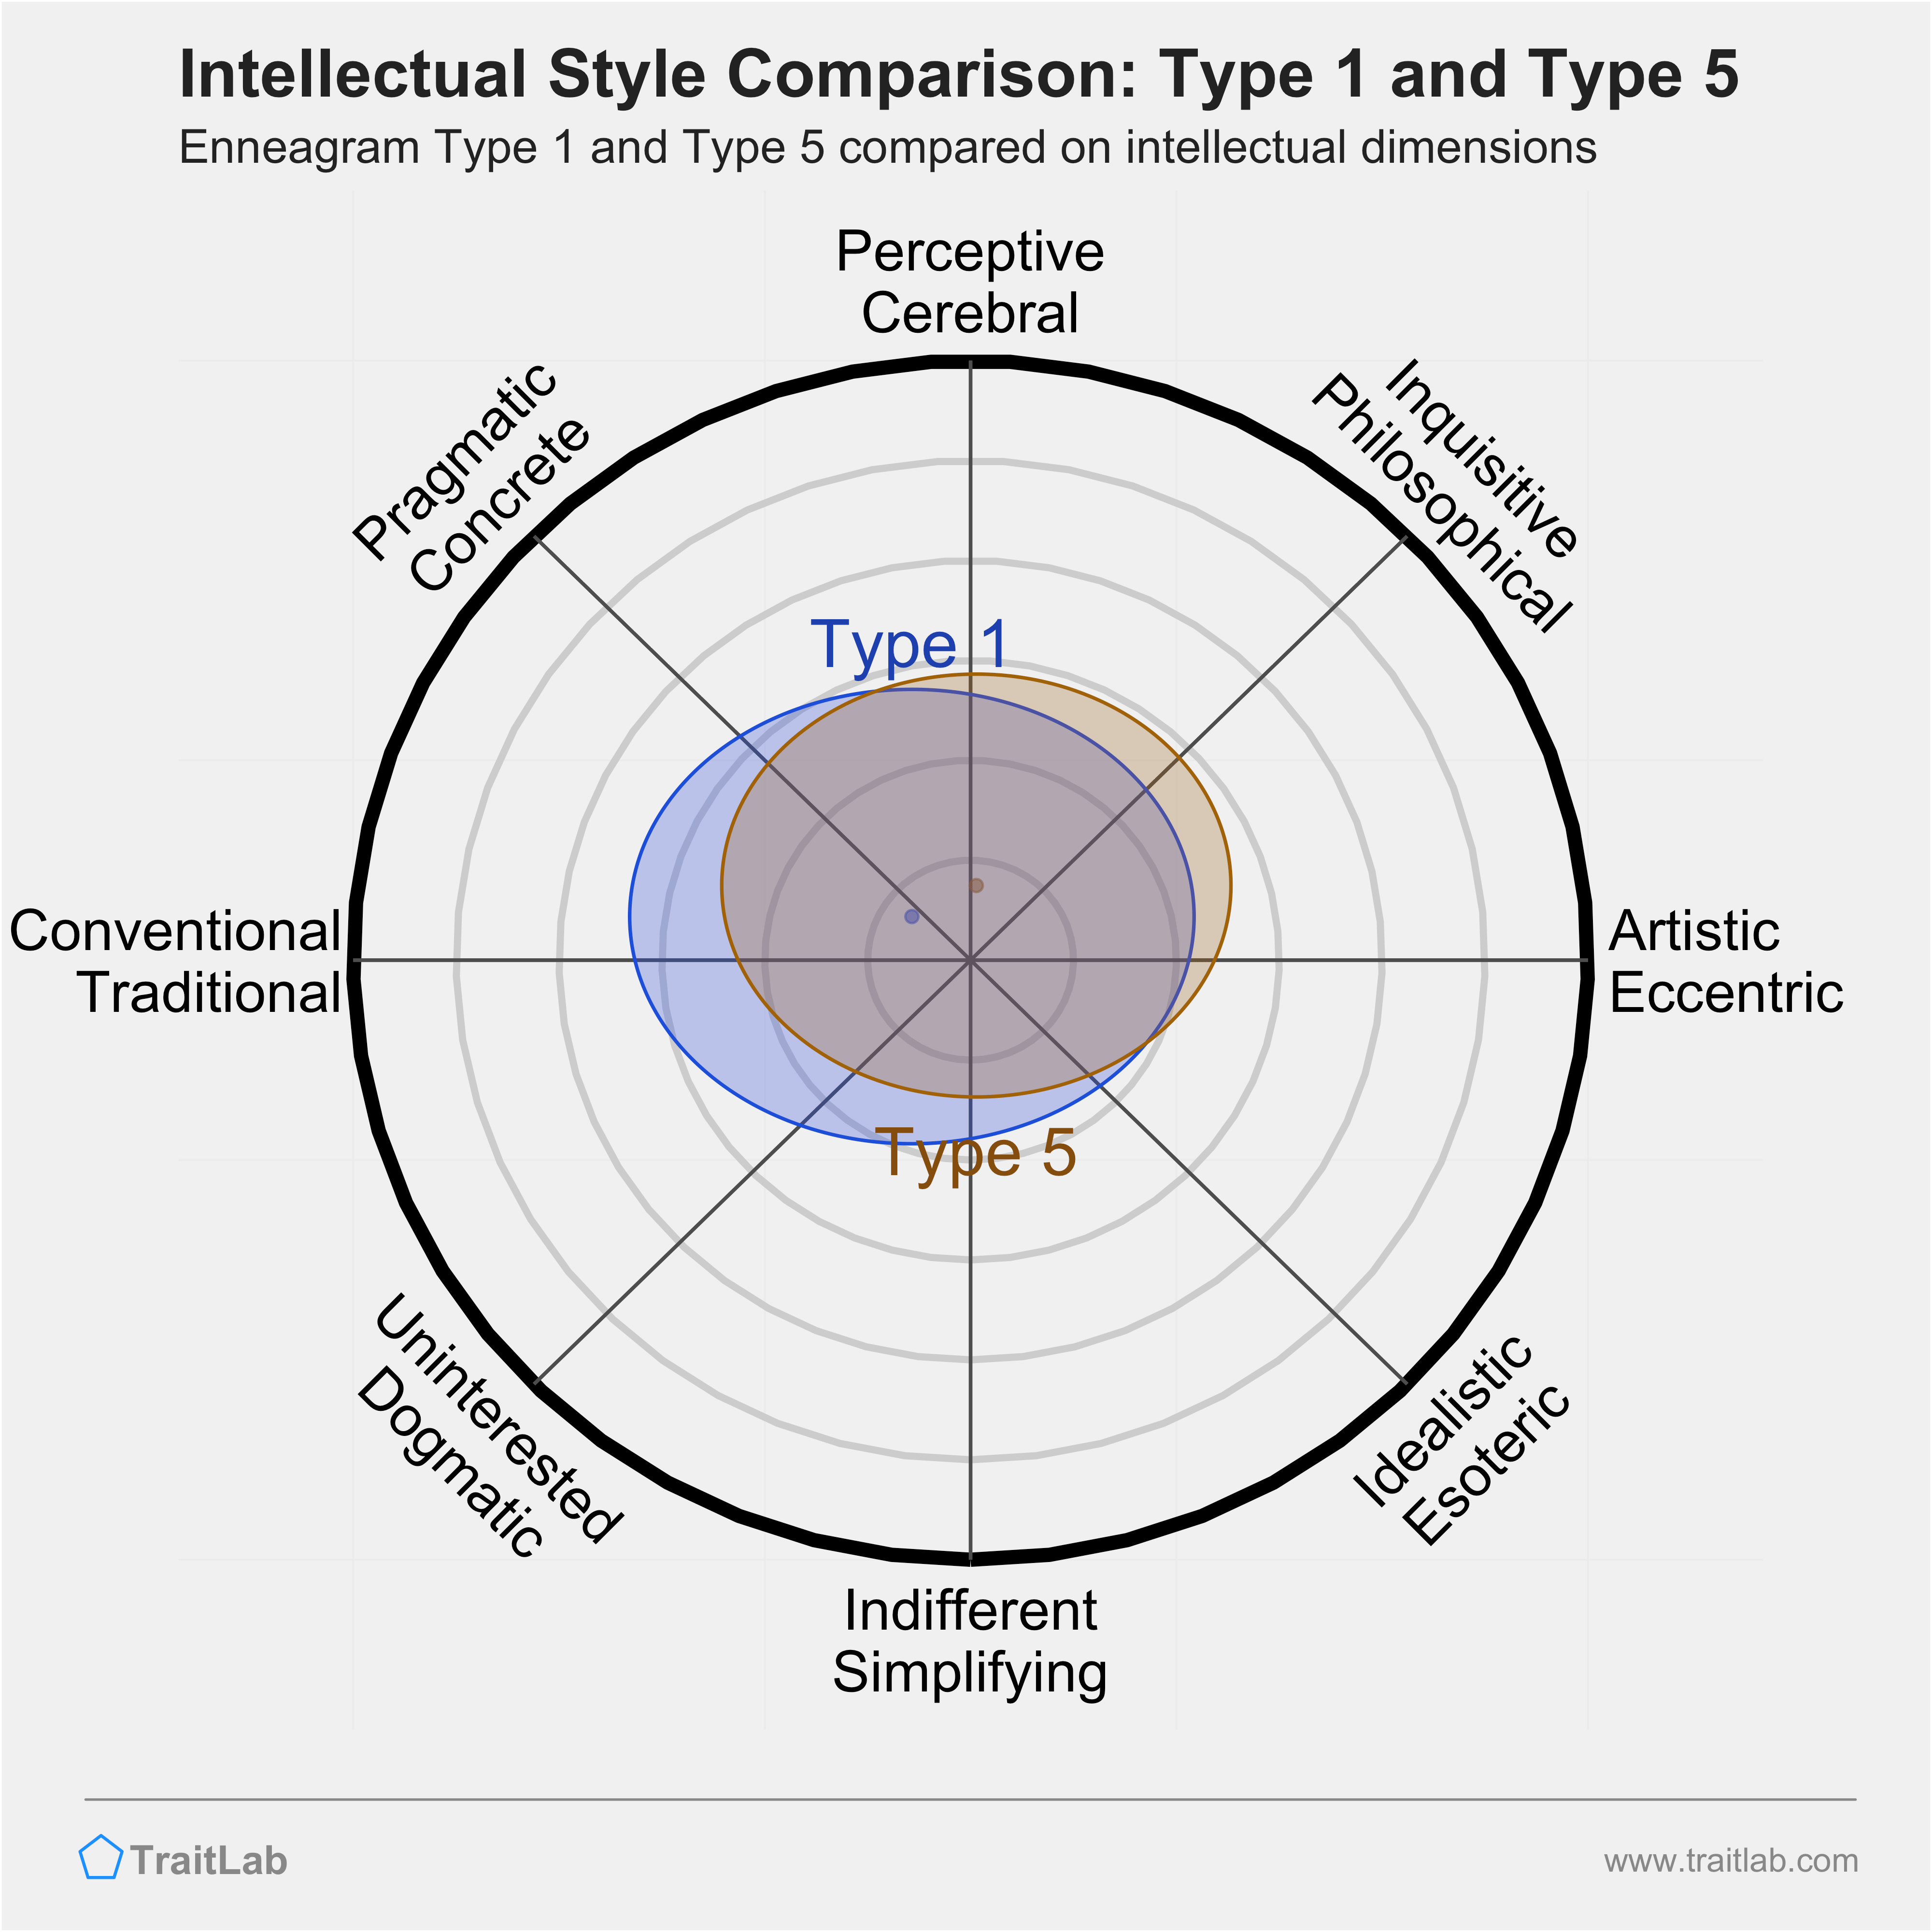 Type 1 and Type 5 comparison across intellectual dimensions